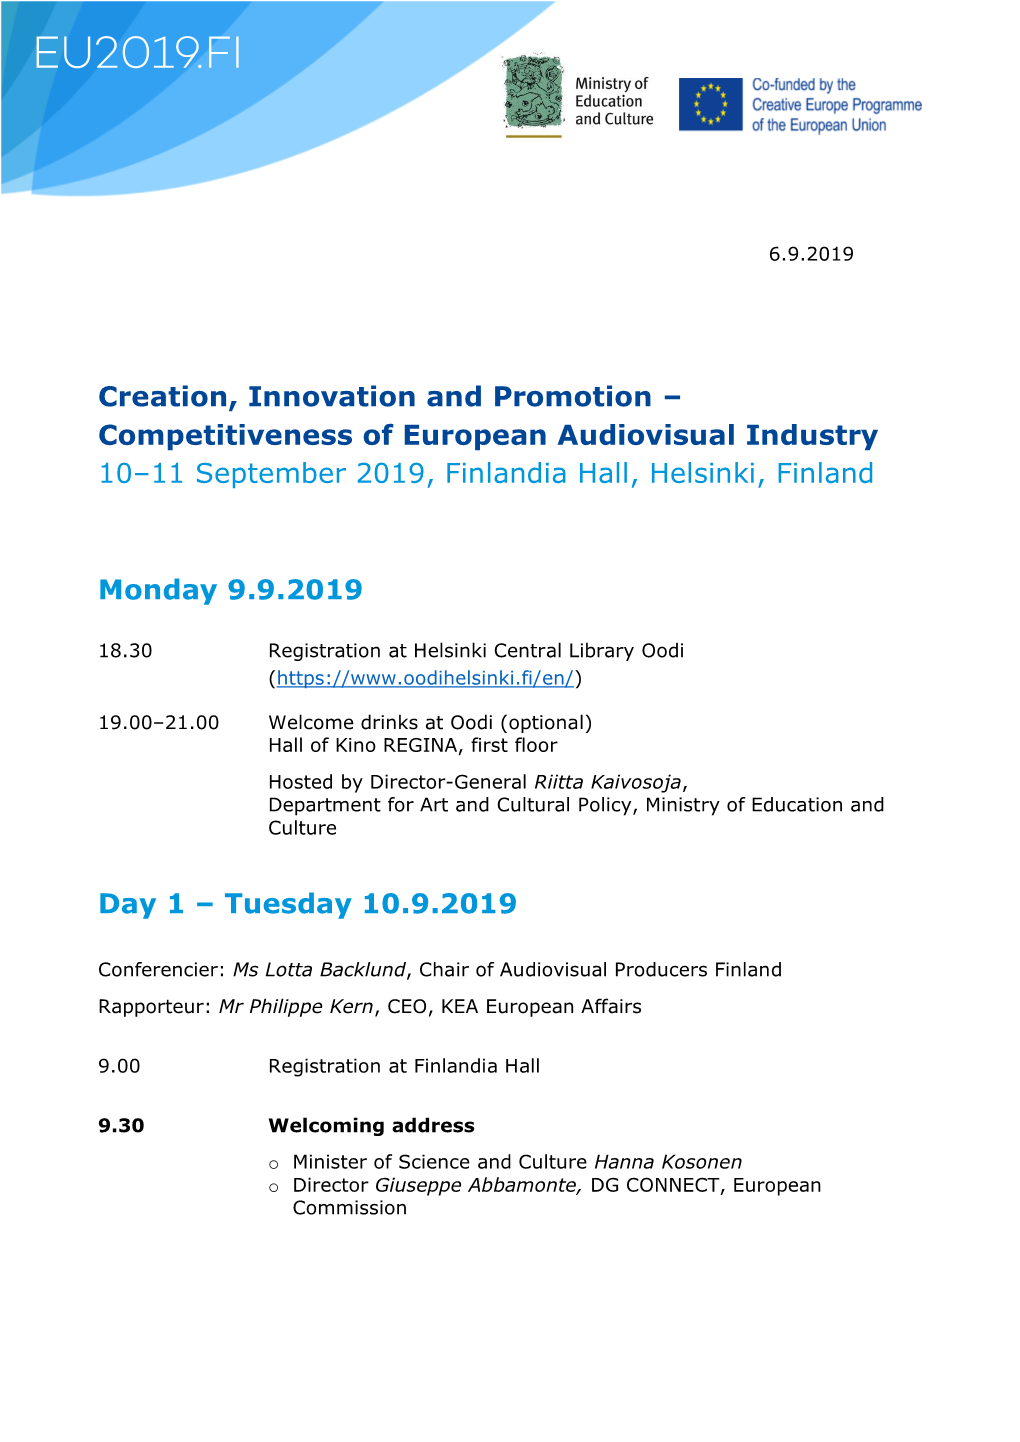 Creation, Innovation and Promotion – Competitiveness of European Audiovisual Industry 10–11 September 2019, Finlandia Hall, Helsinki, Finland